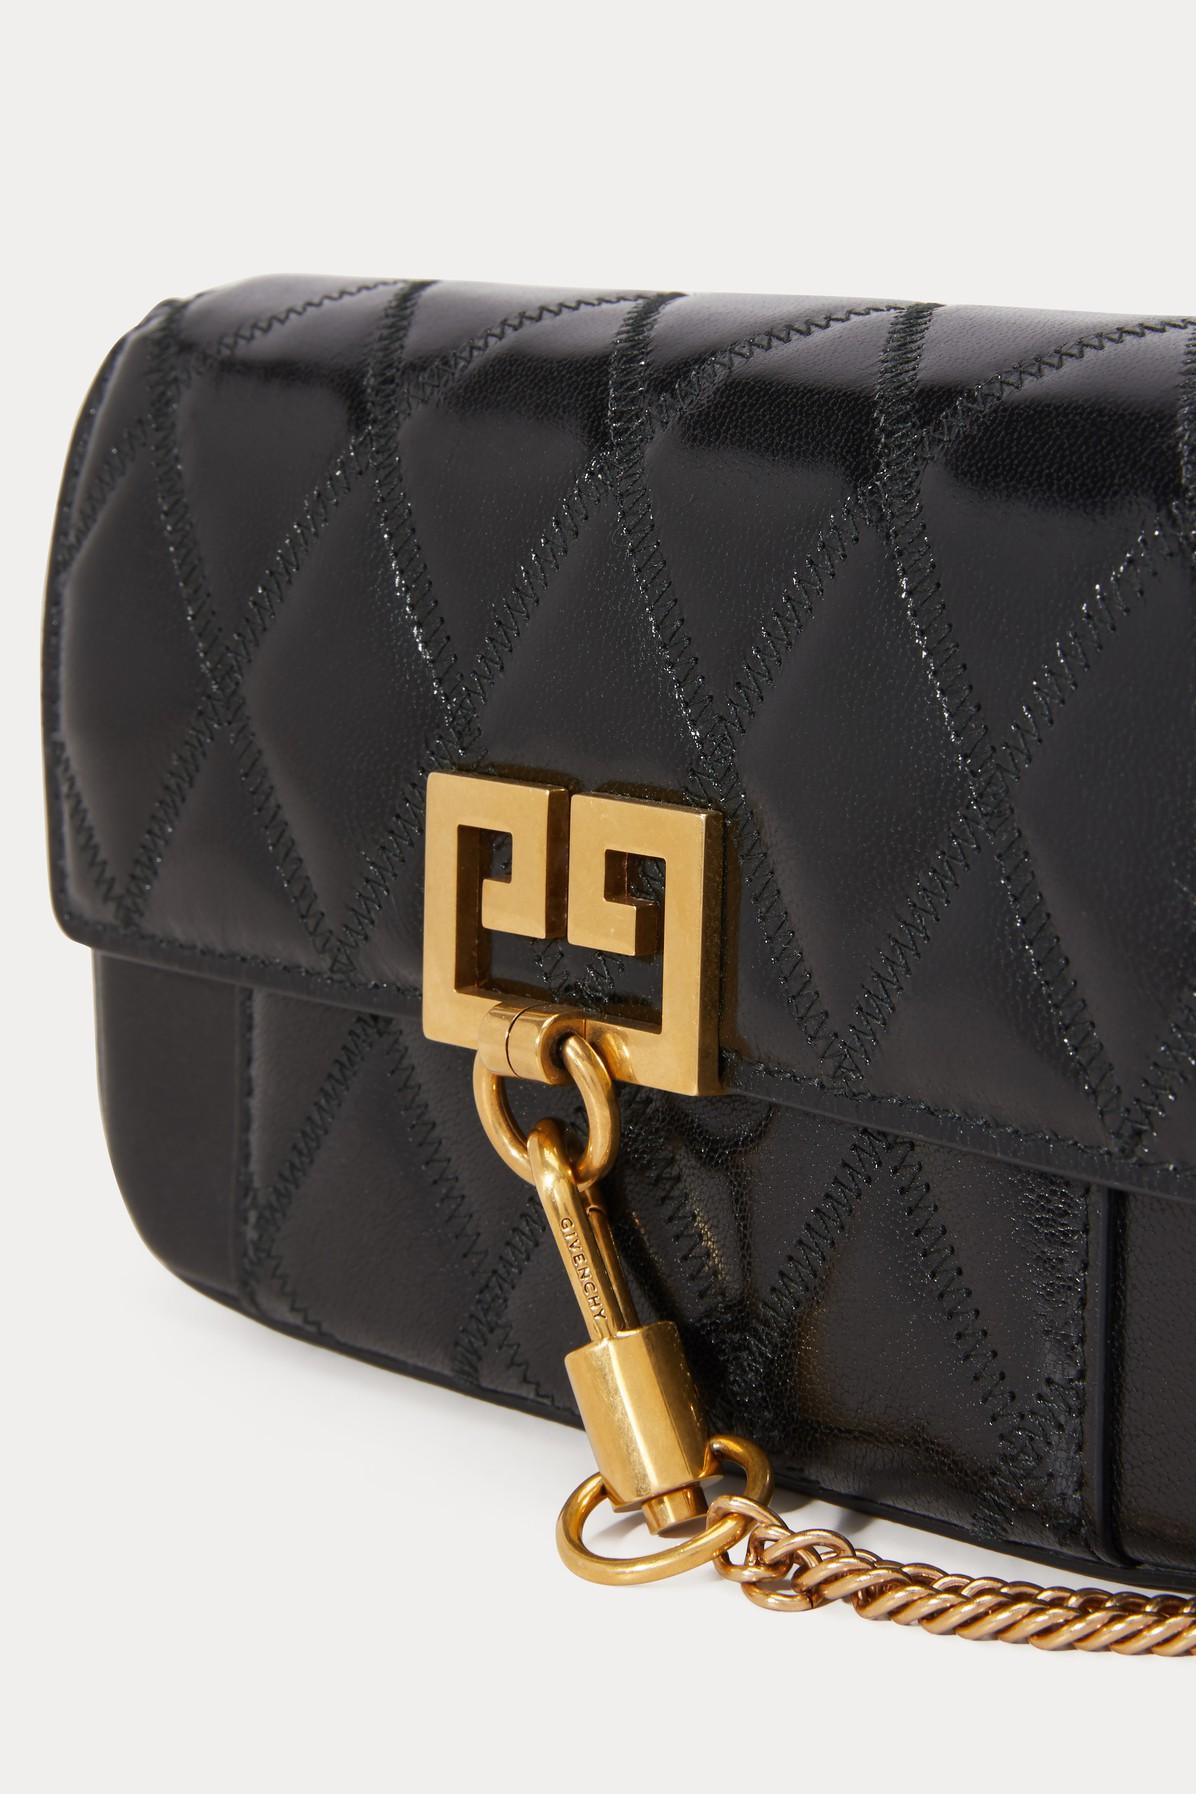 Givenchy Mini Pocket Bag In Diamond Quilted Leather in Black - Lyst